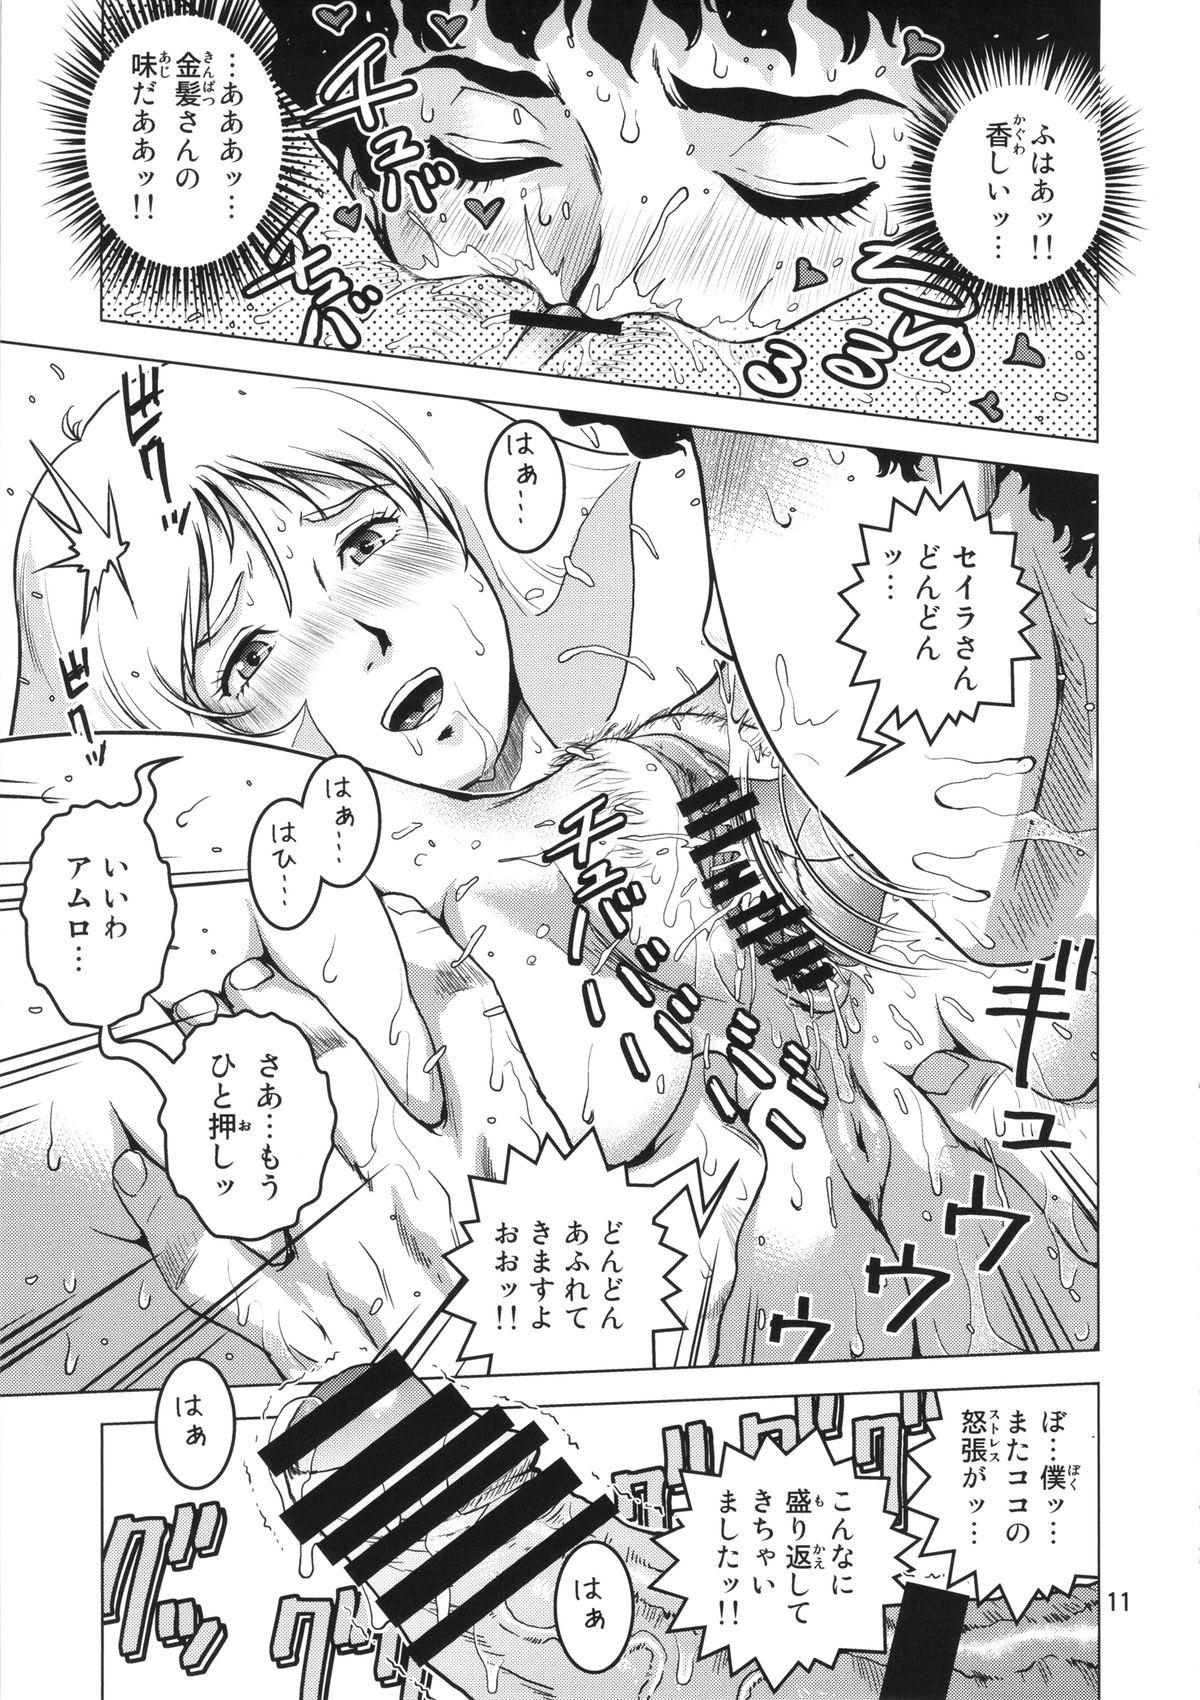 Fat Pussy Osase no Sayla-san - Mobile suit gundam Young Old - Page 10